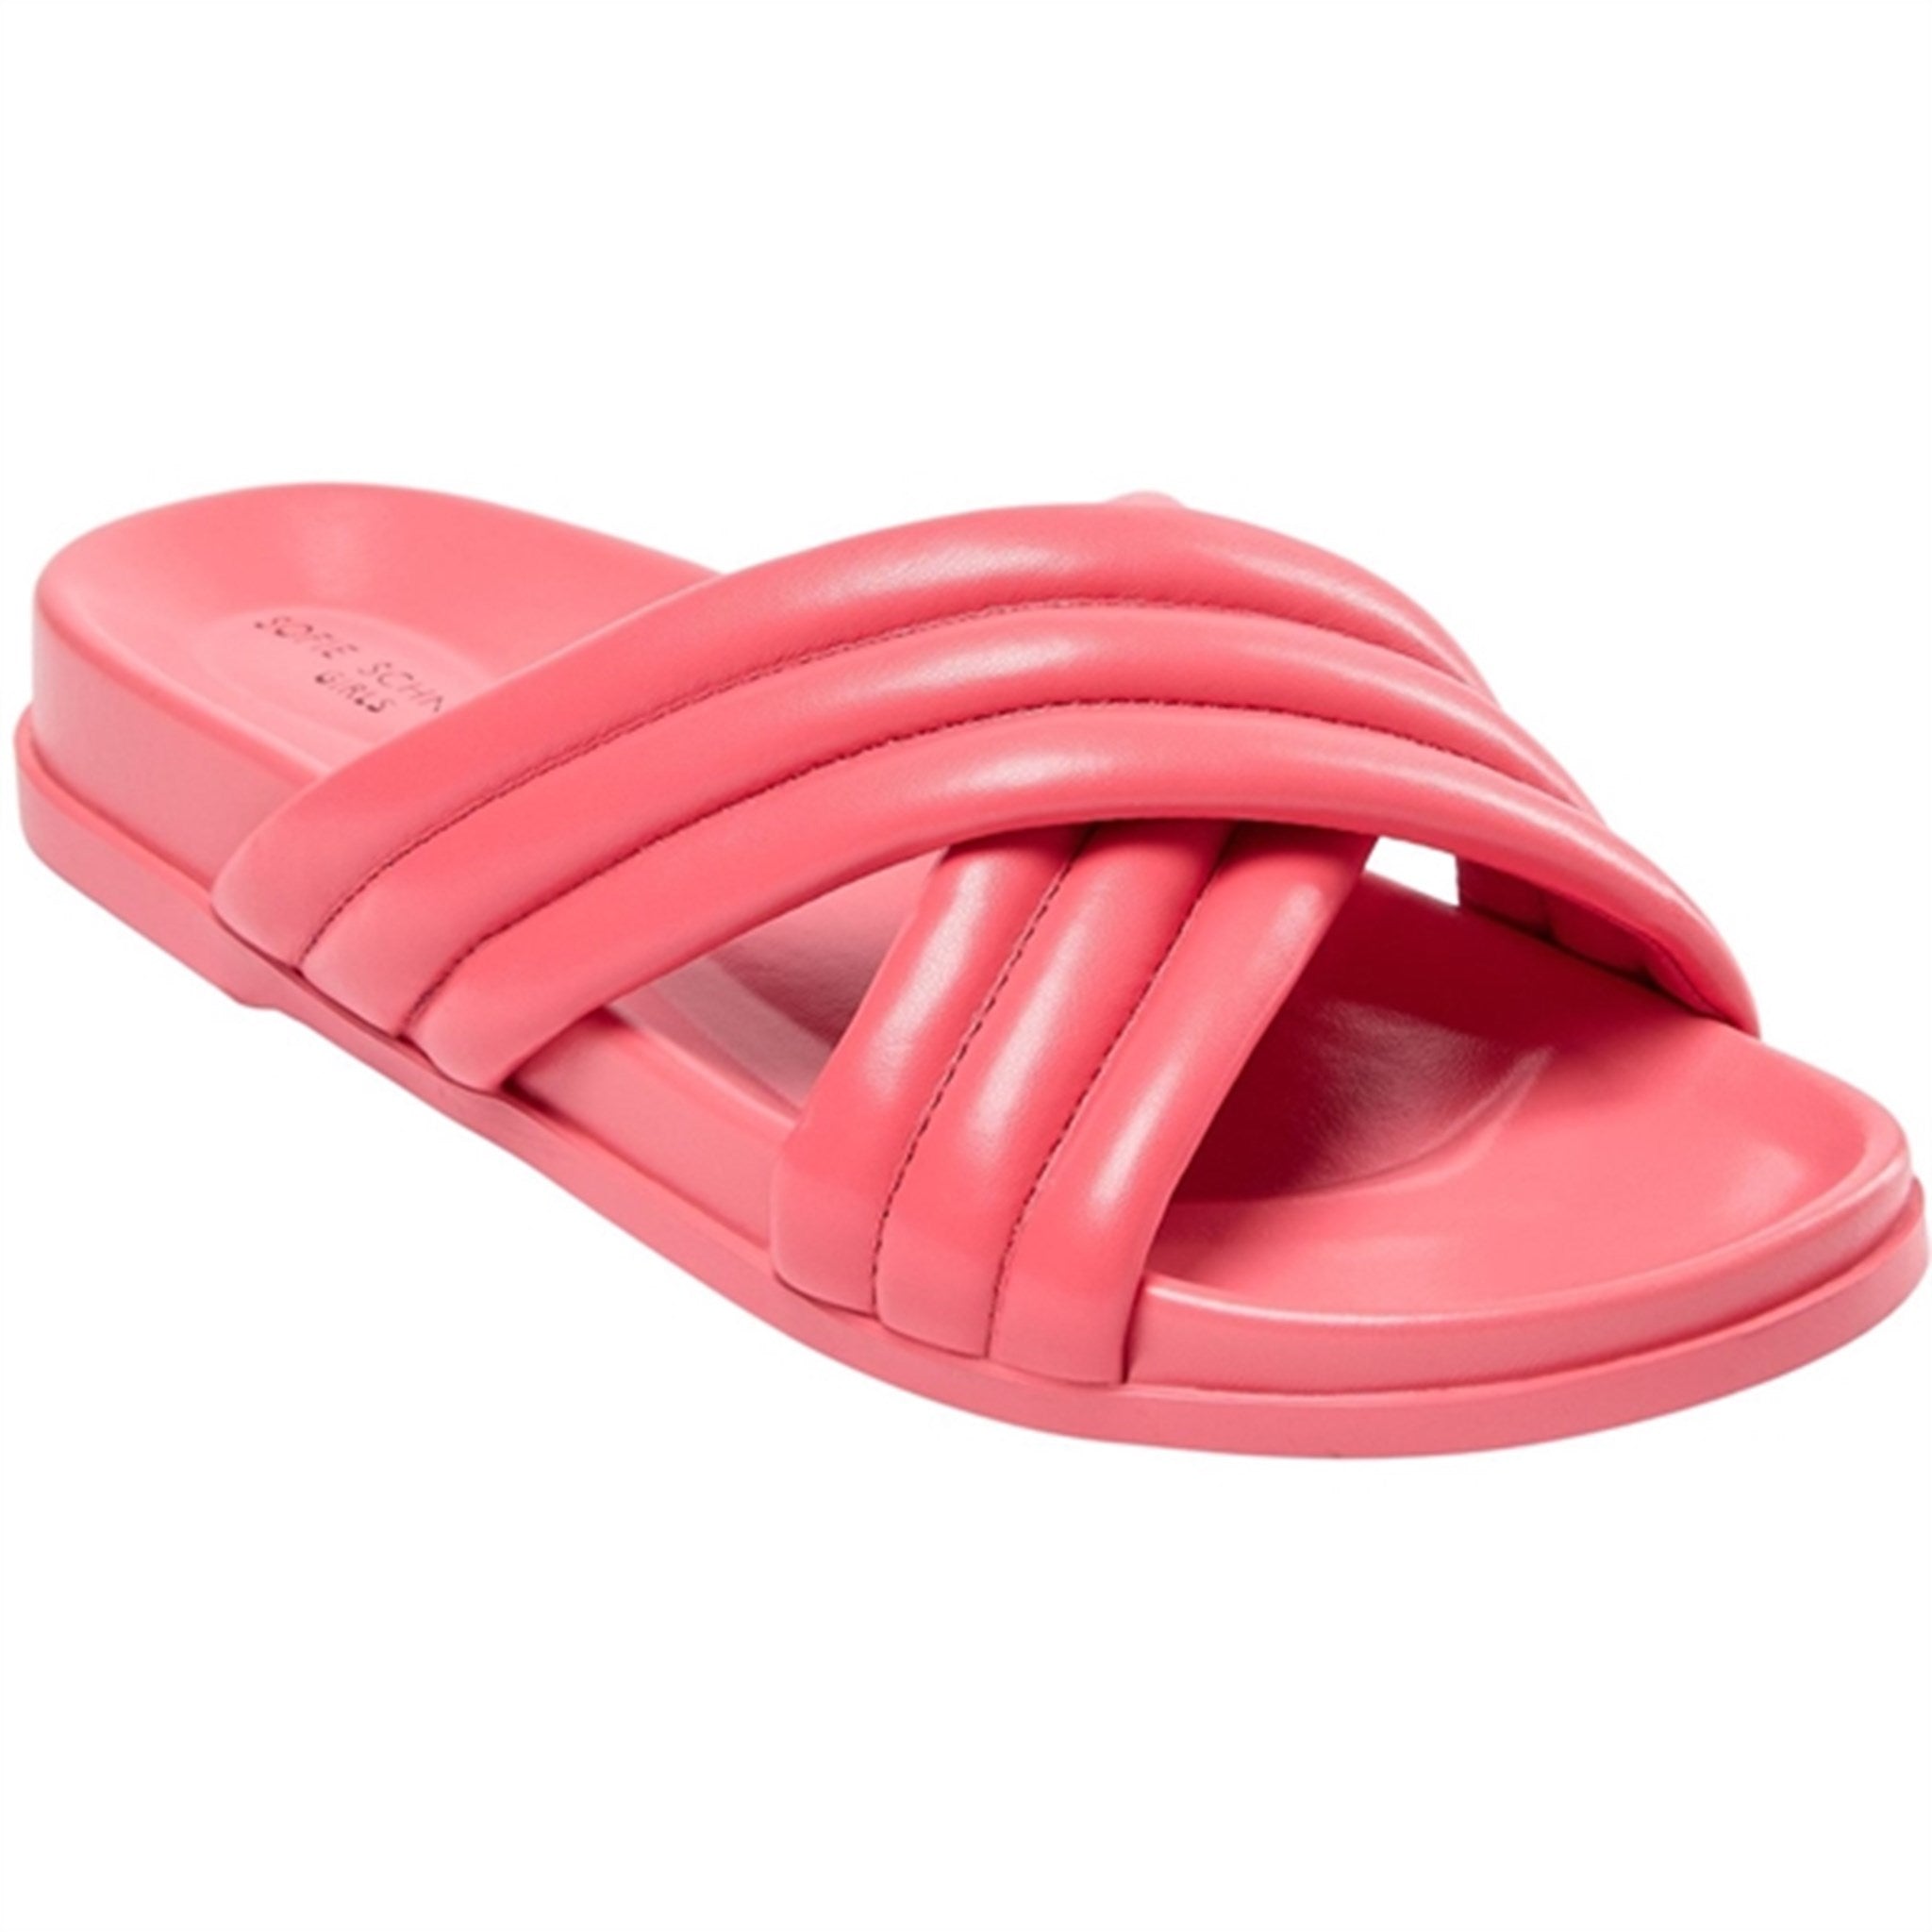 Sofie Schnoor Young Sandal Coral pink 2